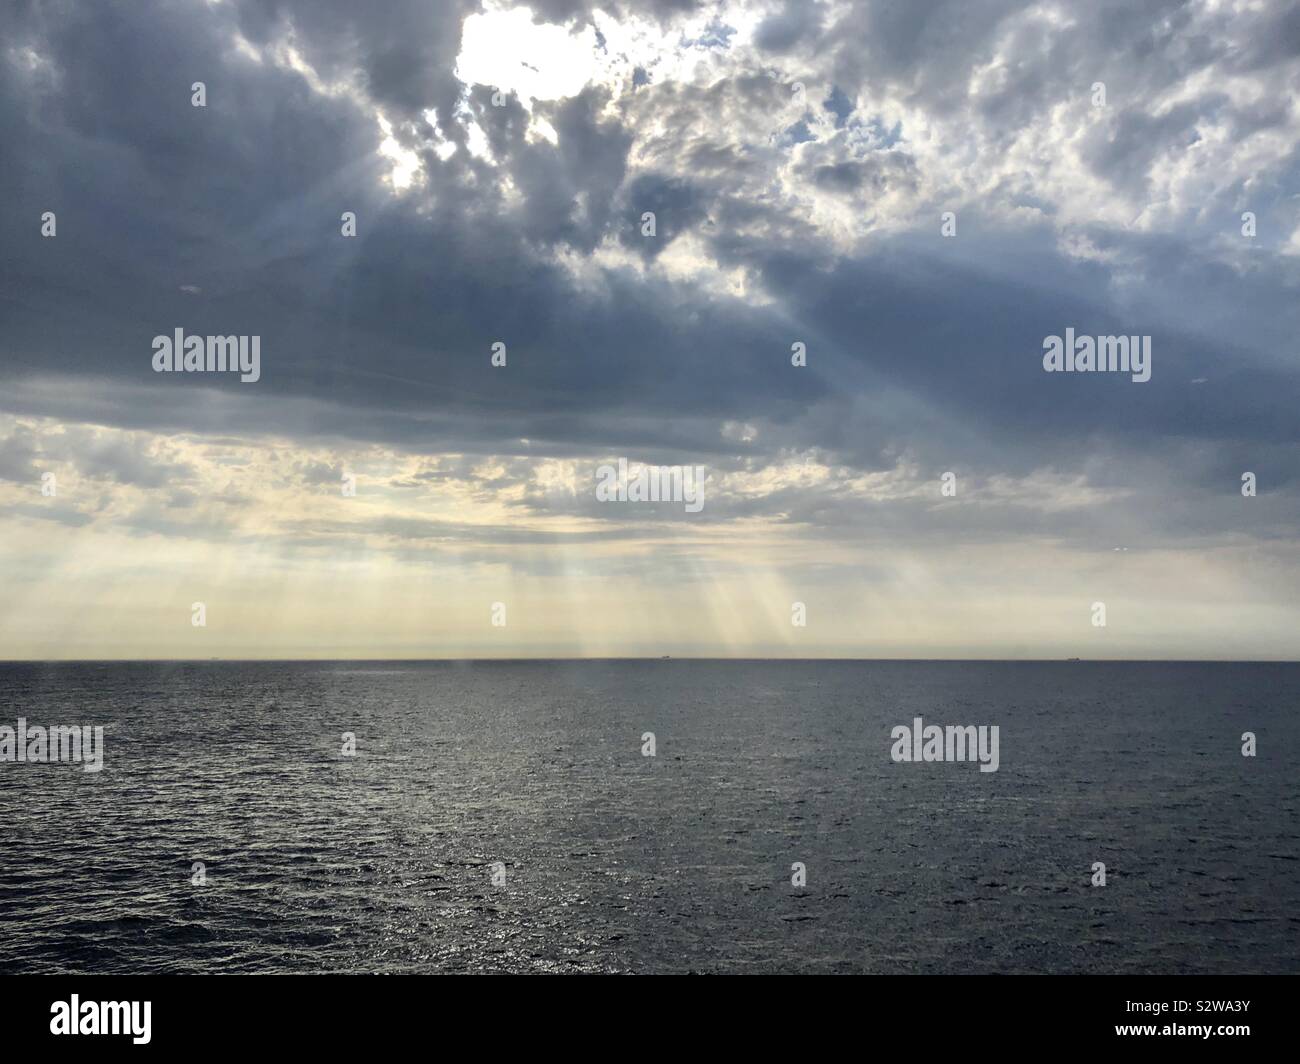 Sunlight shining through clouds over sea Stock Photo